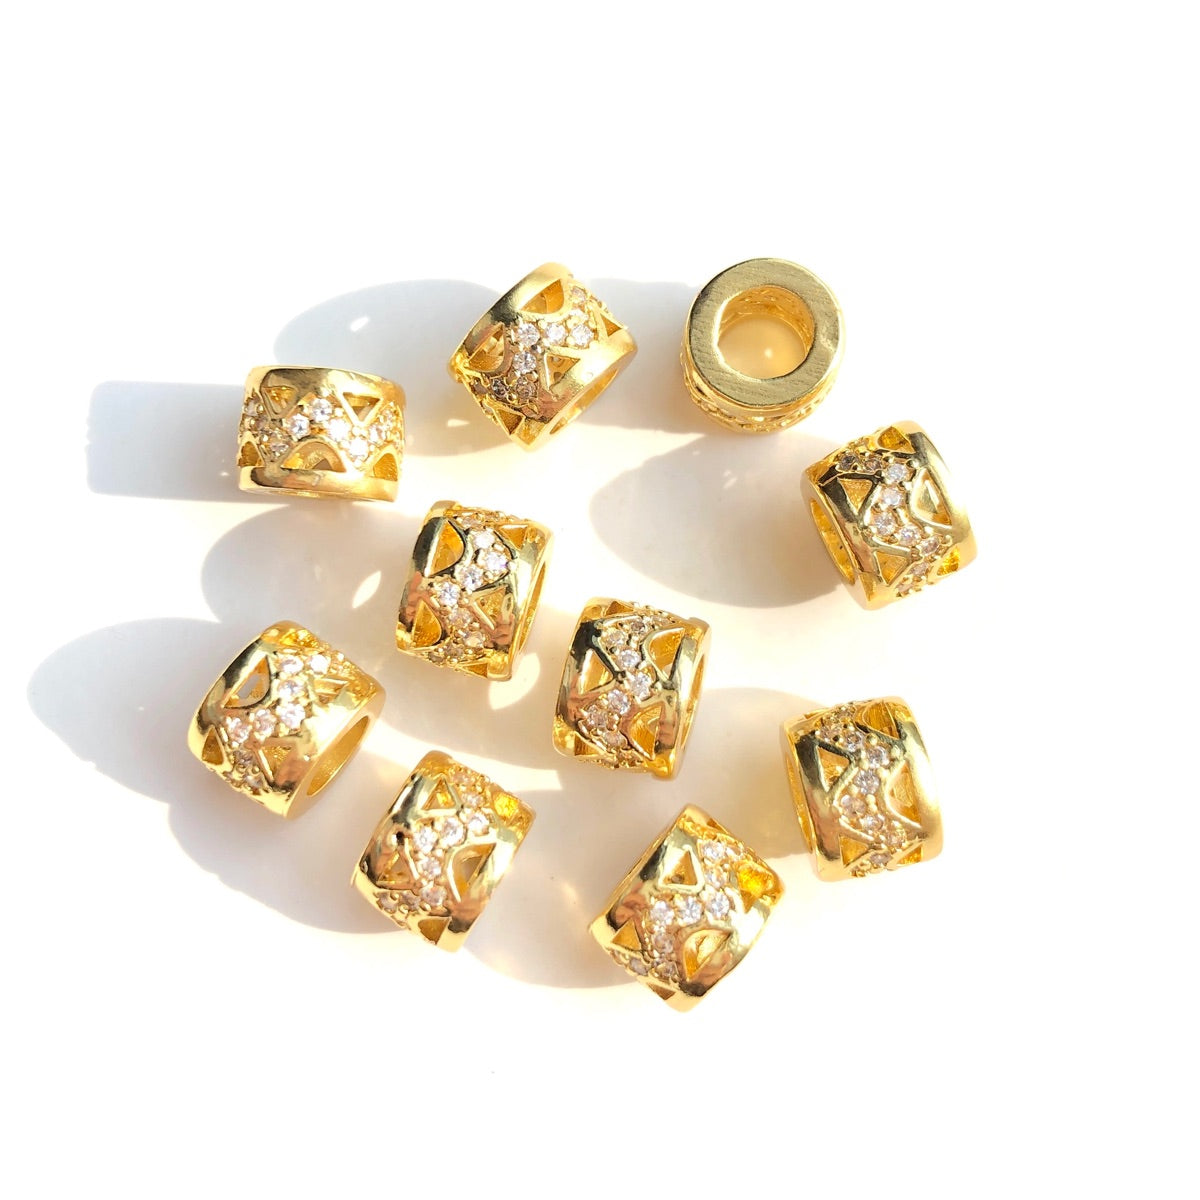 10mm Gold Rondelle Large Hole Spacer Beads - Set of 20